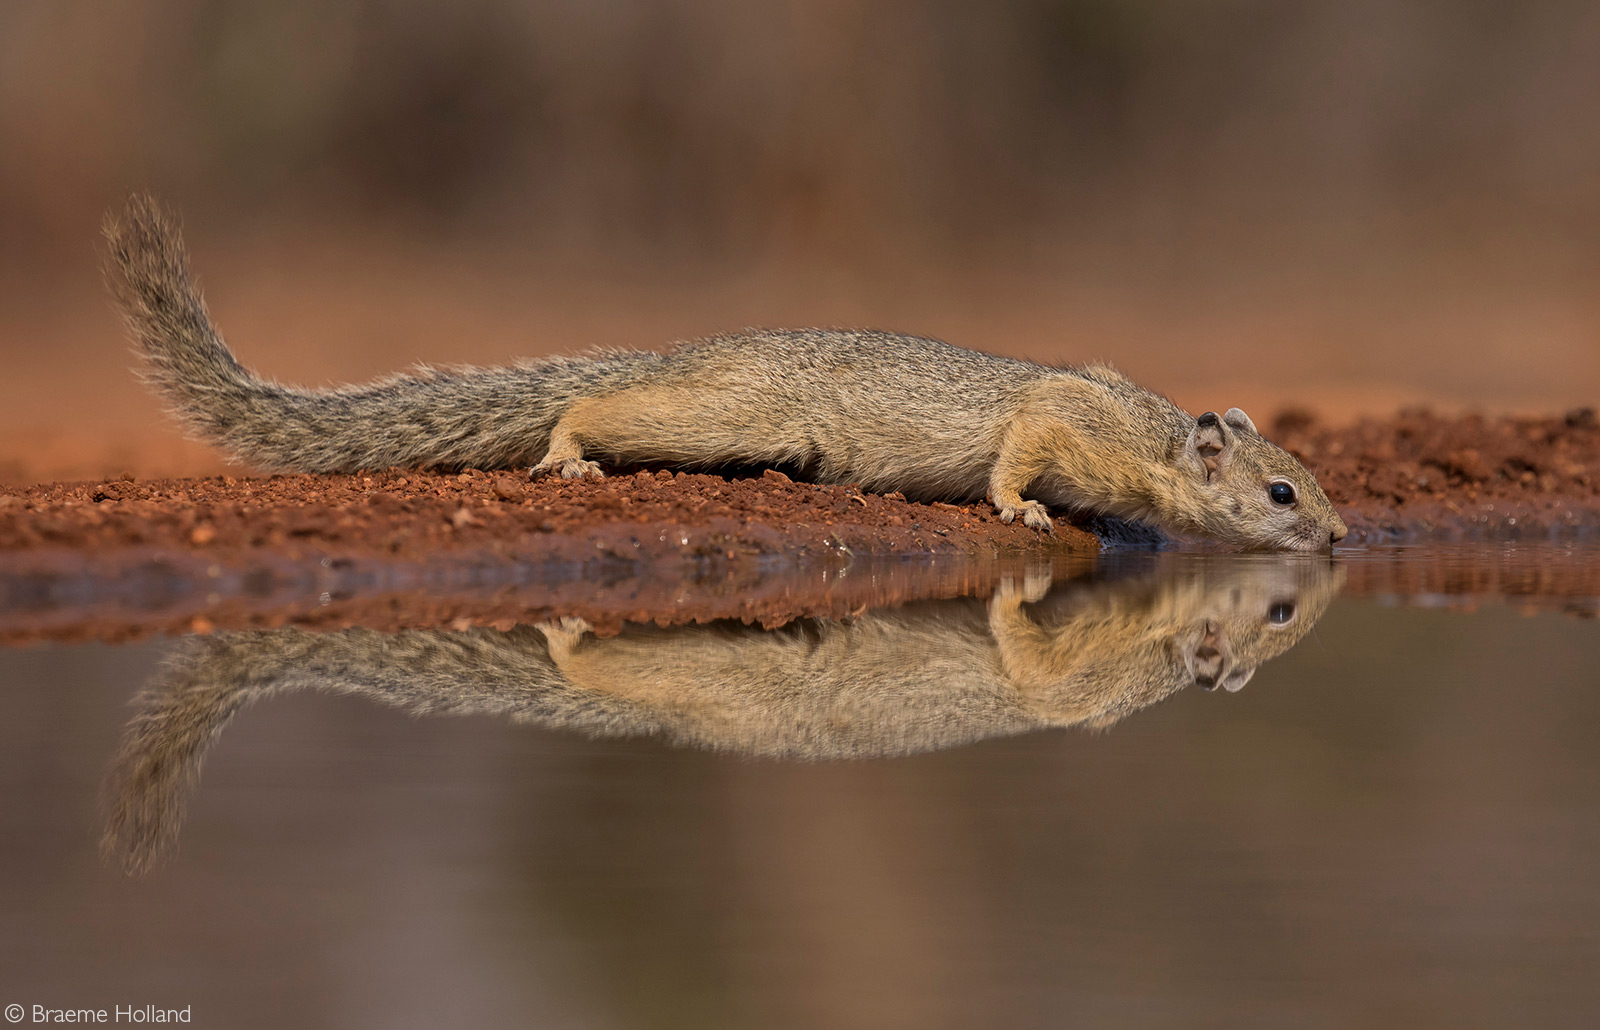 A tree squirrel producers a mirror image reflection while drinking water. Karongwe Private Game Reserve, South Africa © Braeme Holland